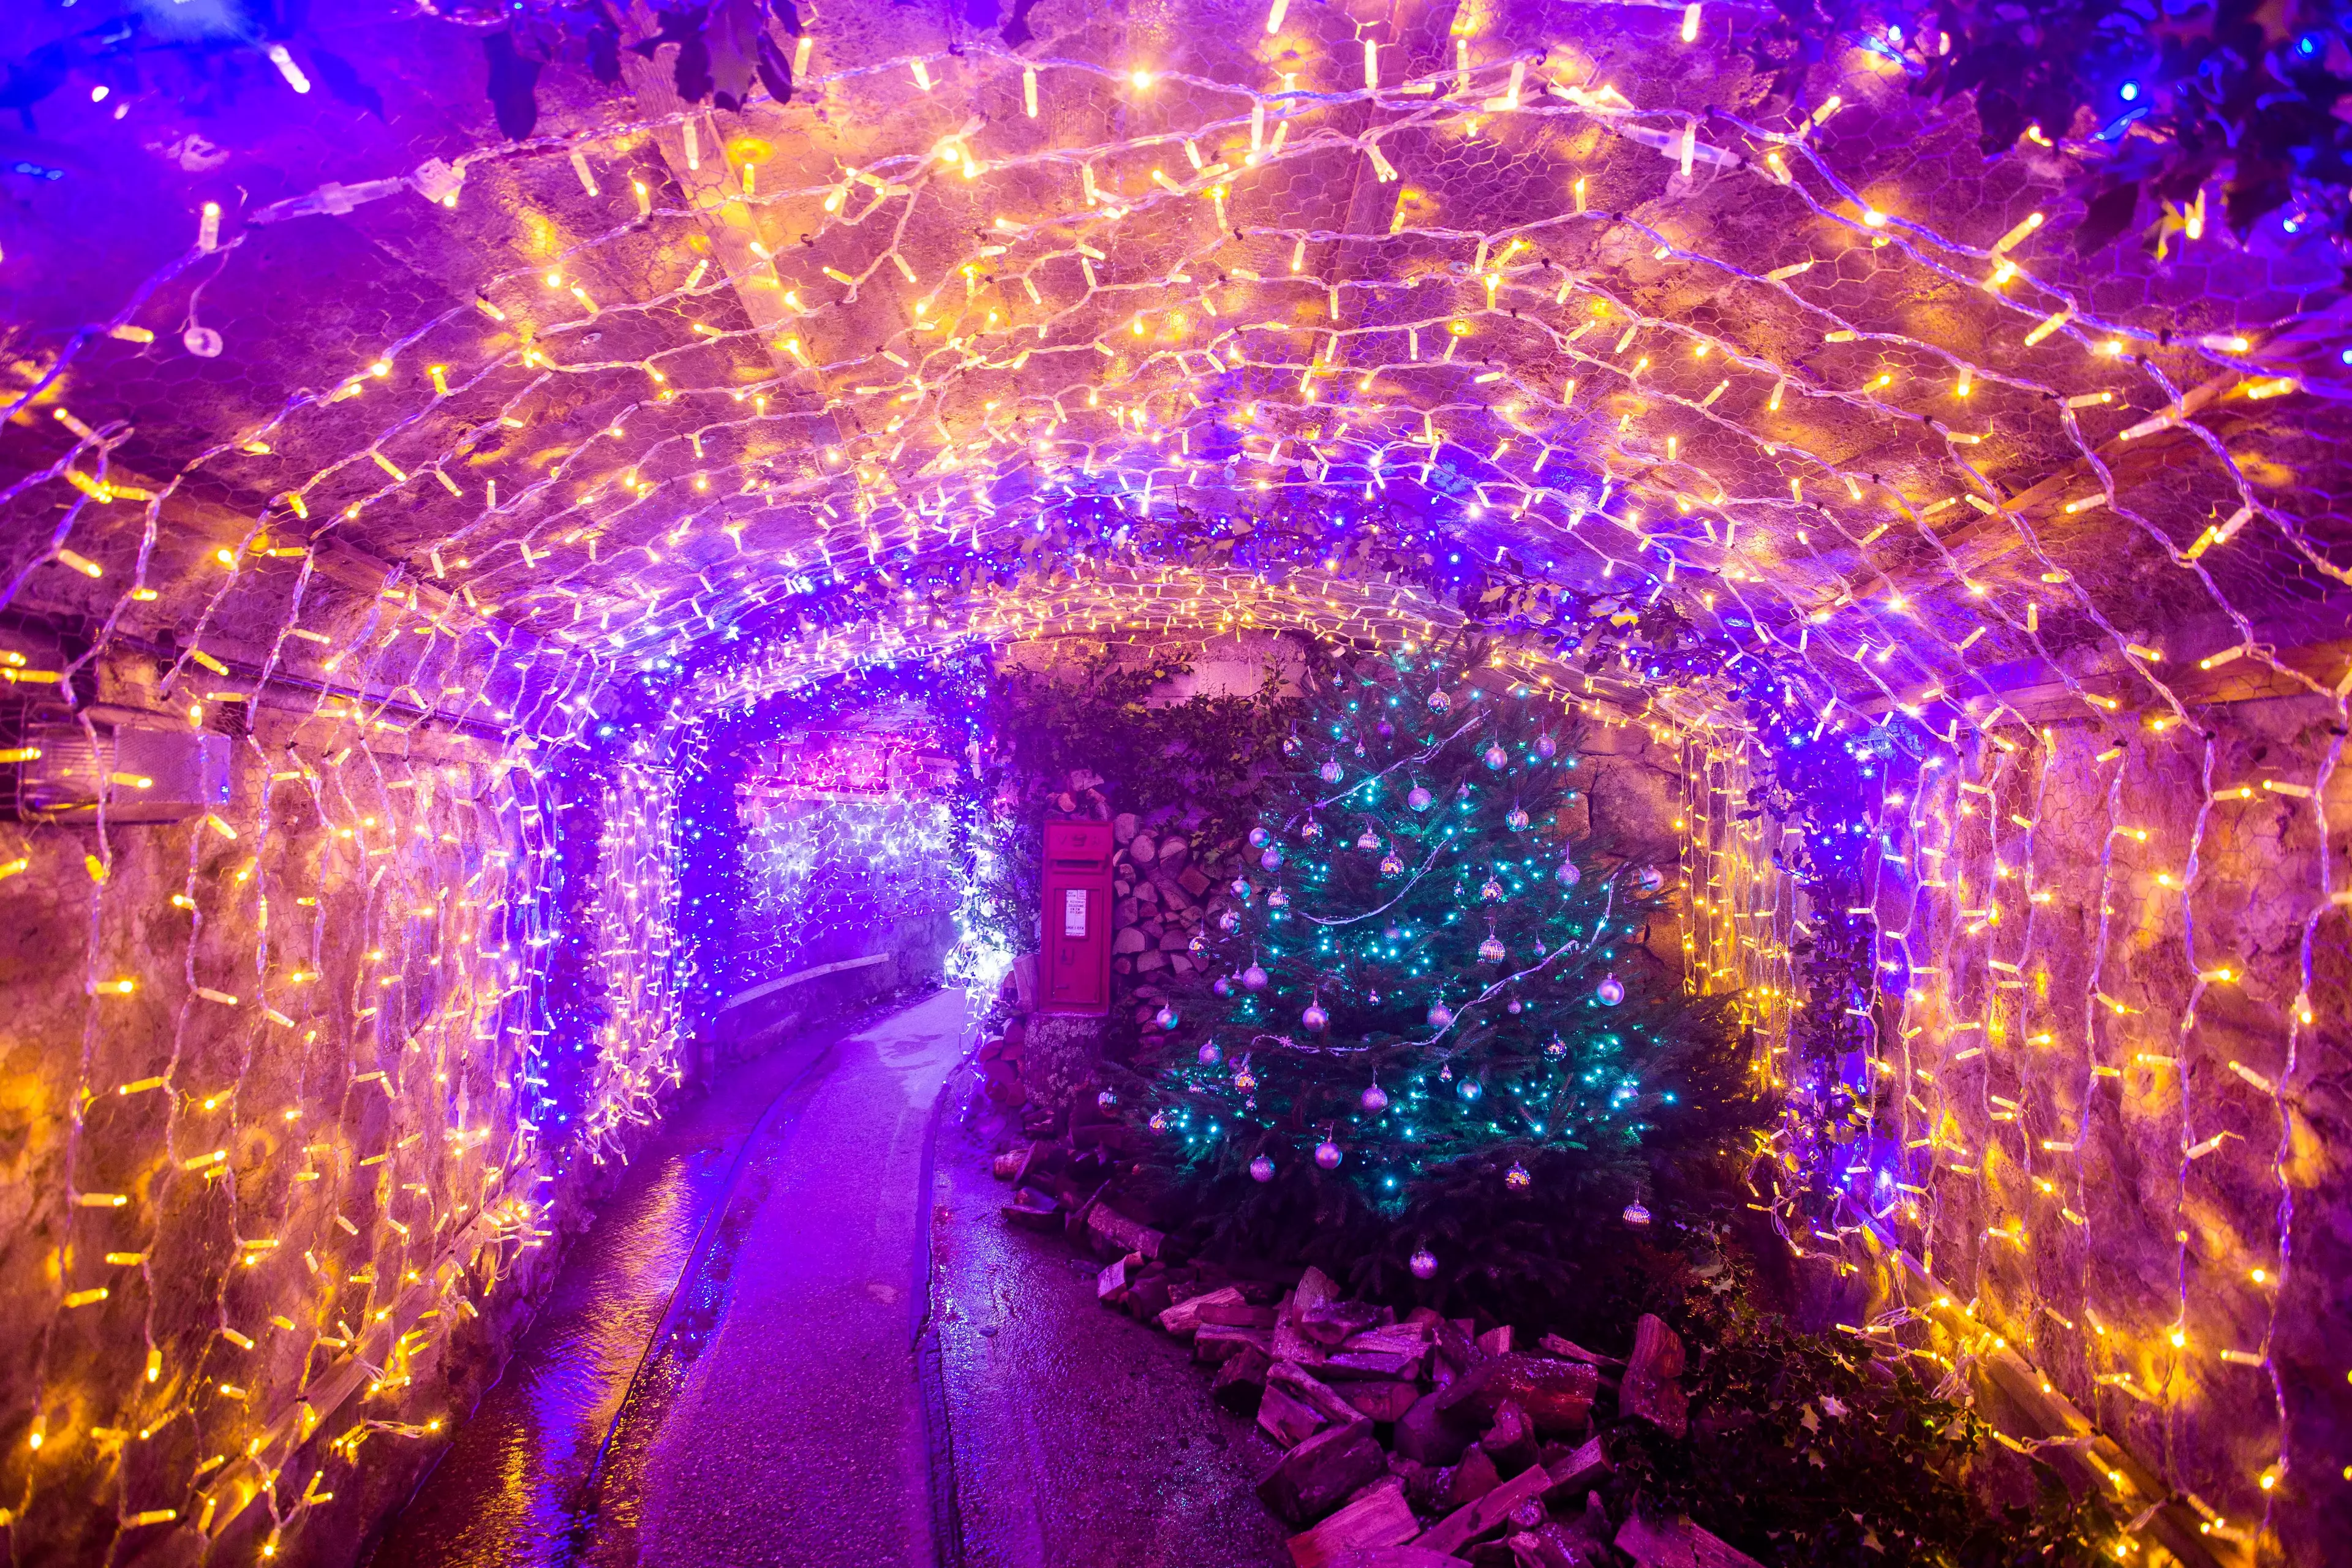 The UK's longest festive tunnel of lights has opened in Cornwall (